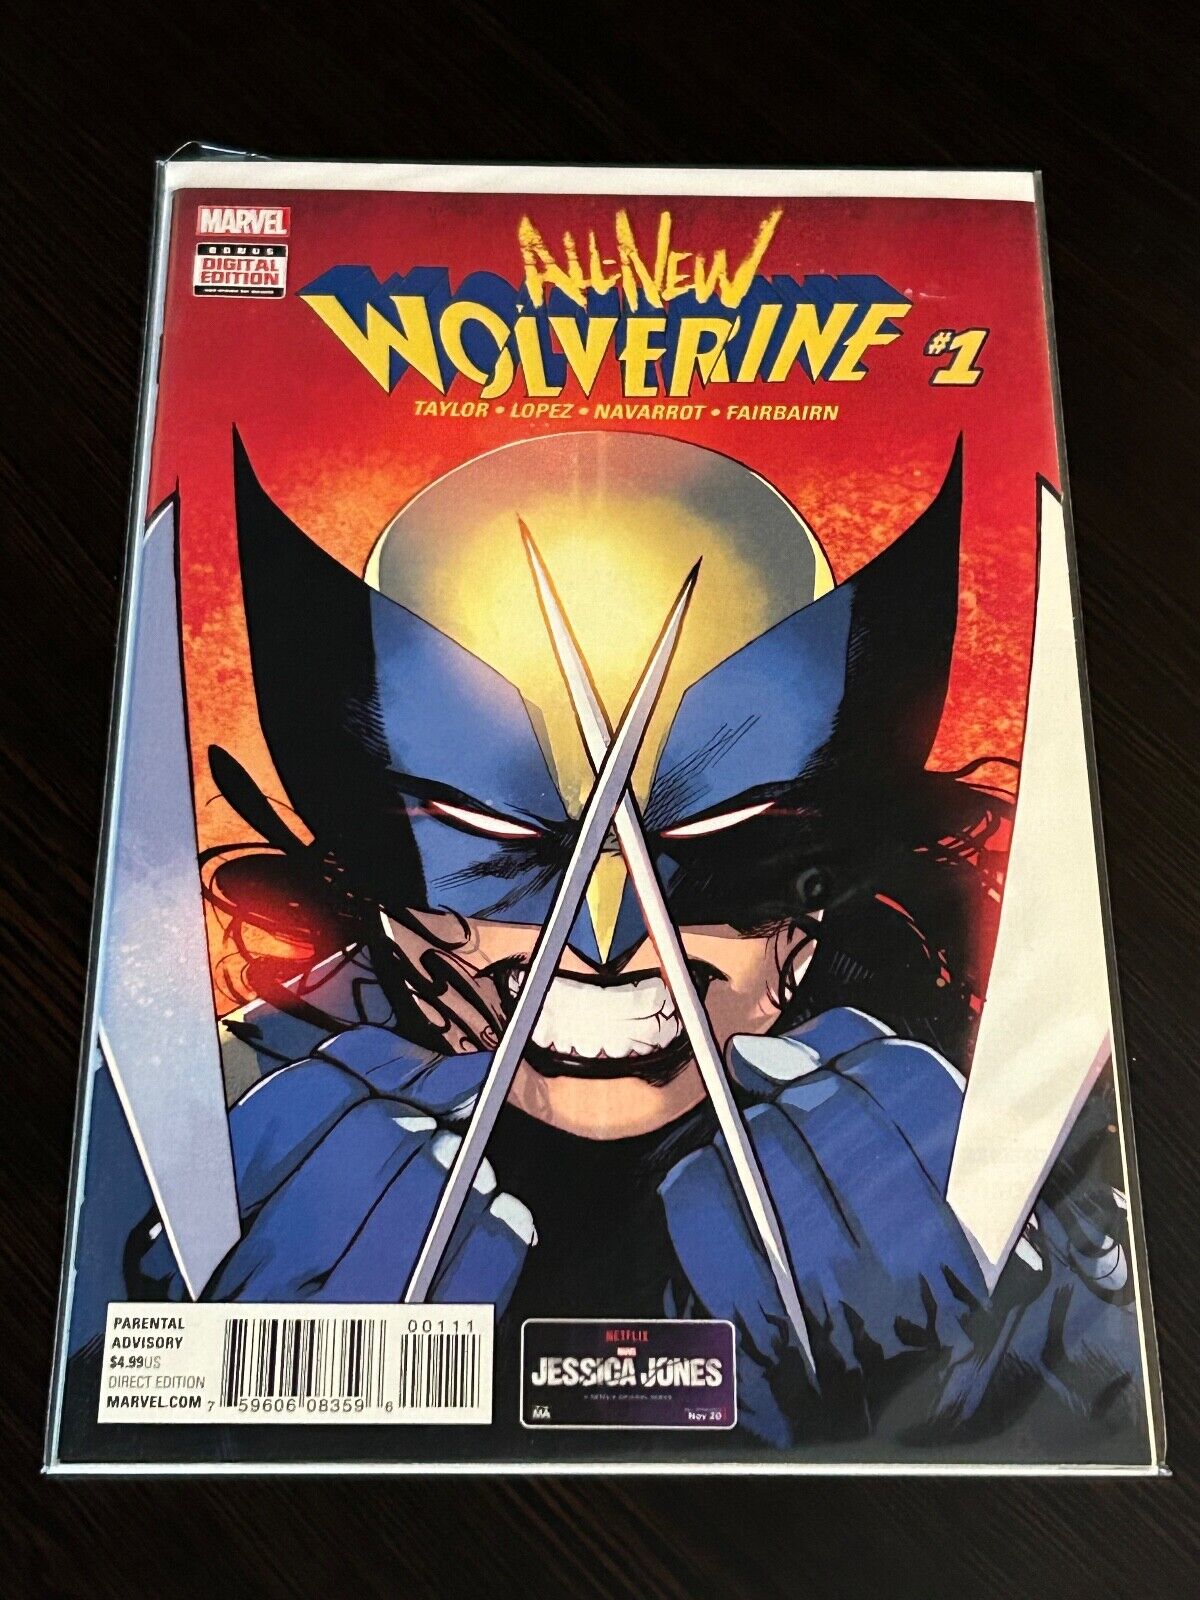 All-New Wolverine #1 (2015) NM/High Grade - 1st X-23/Laura Kinney as